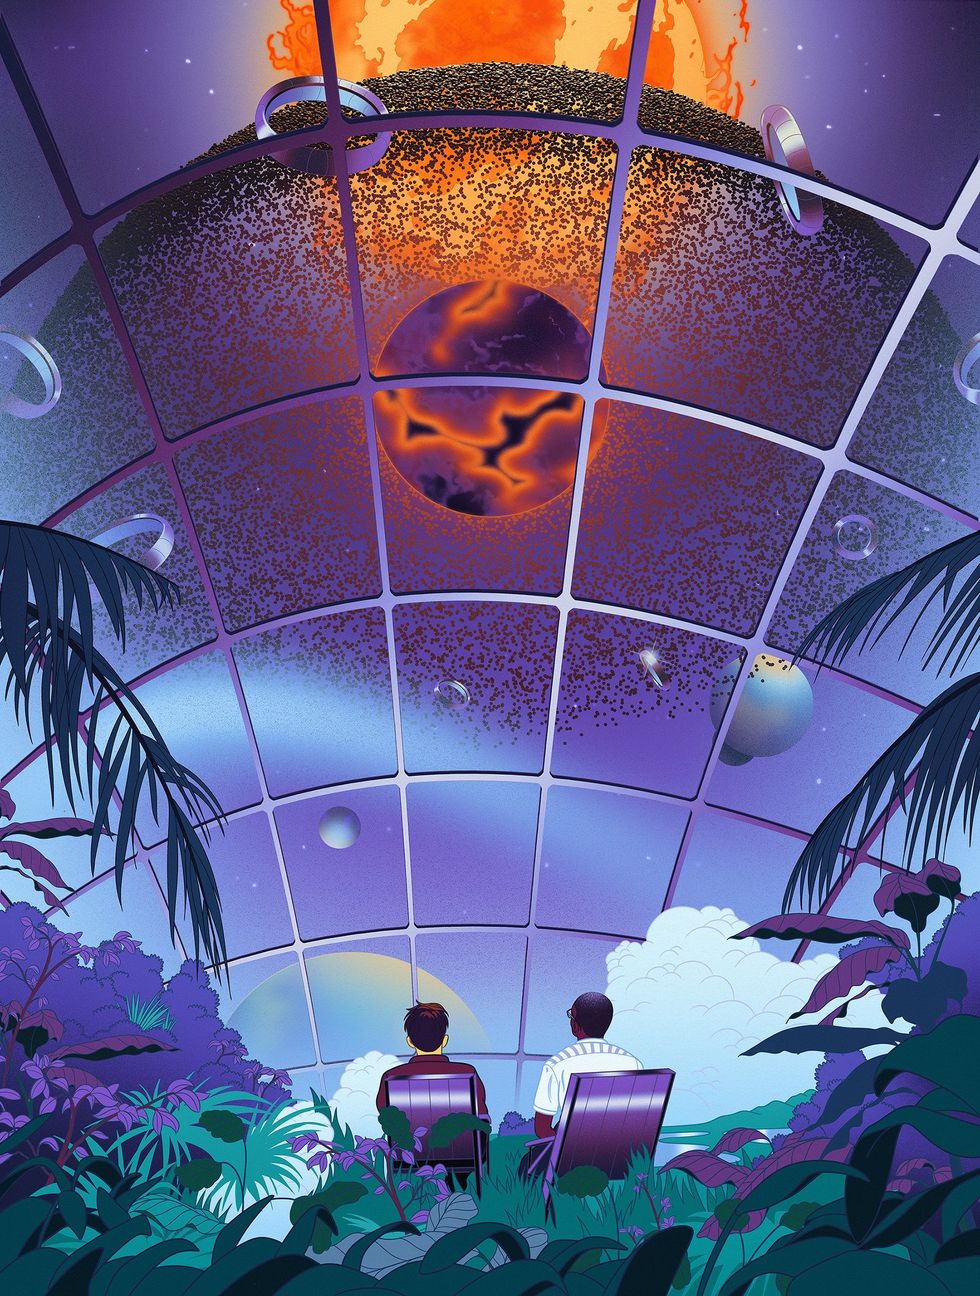 An illustration of two men sitting on chairs looking out a window at space.